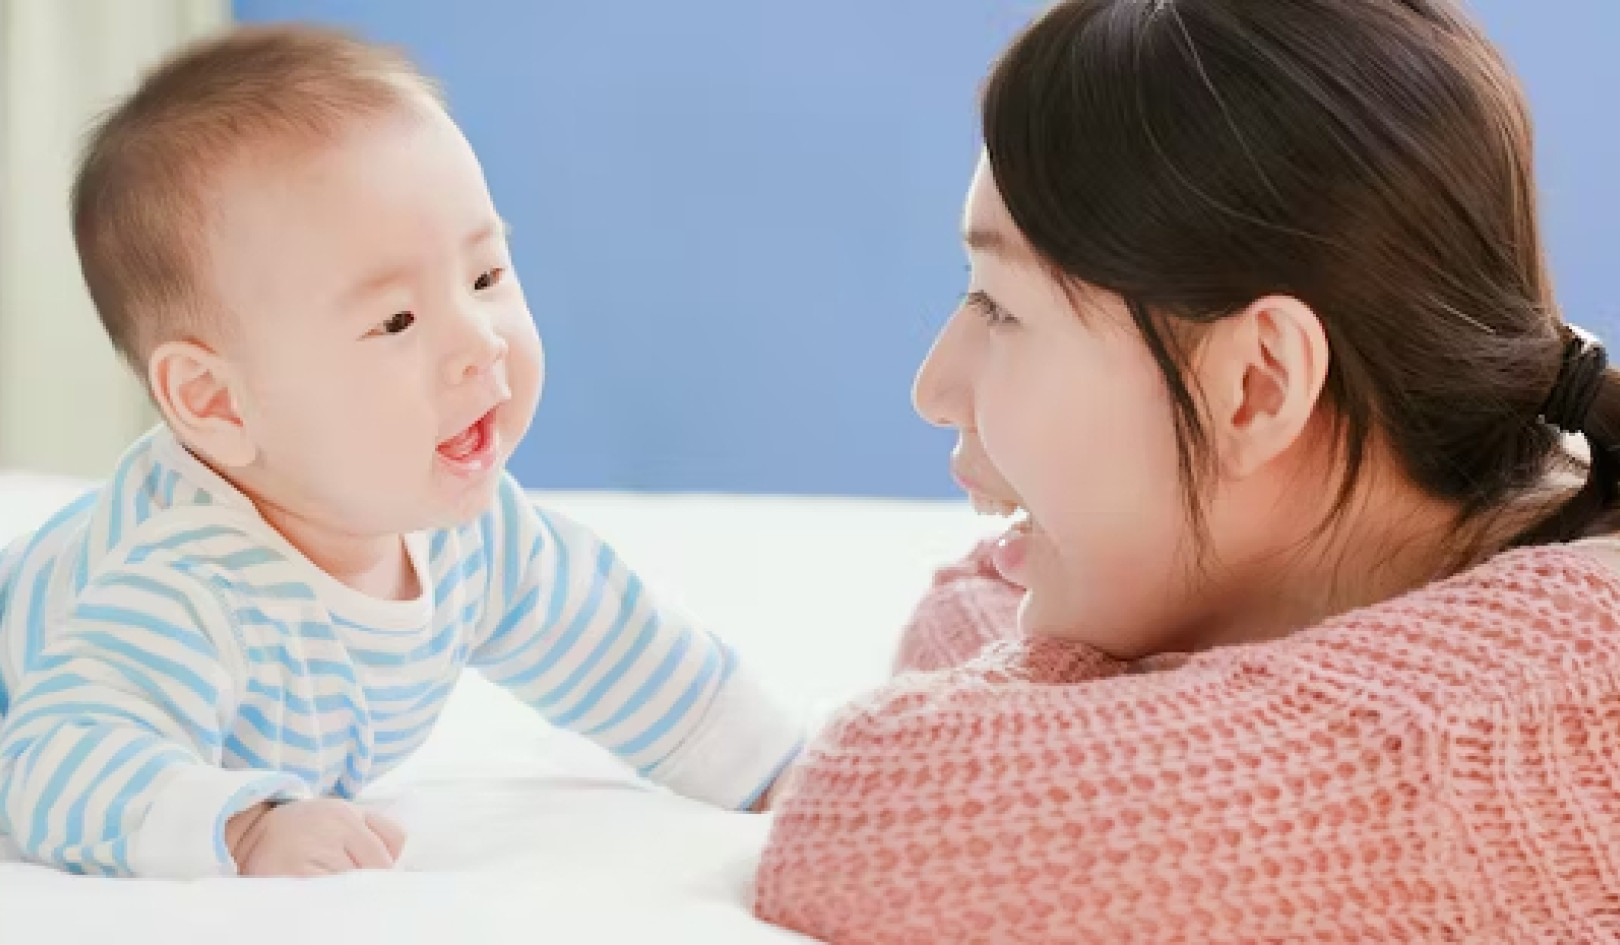 Talking to Babies May Contribute to Brain Development – Here’s How To Do It